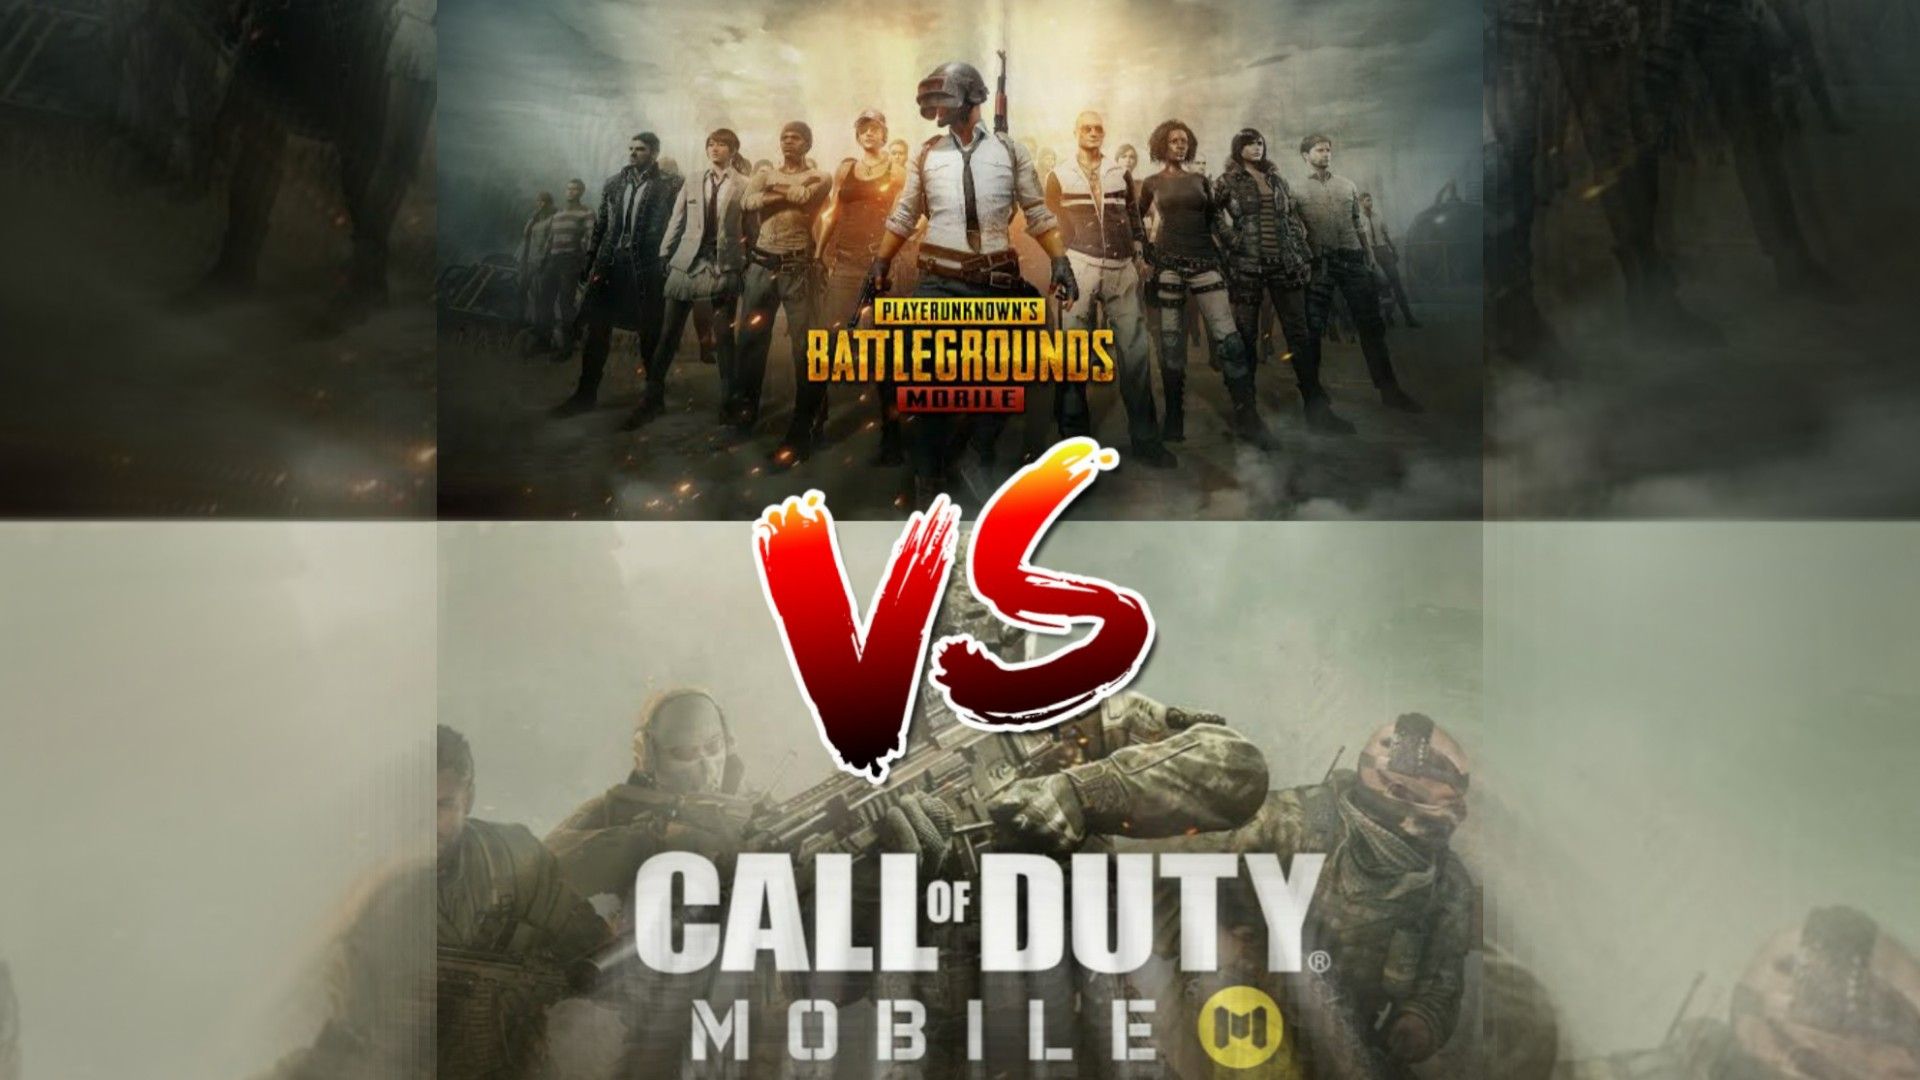 PUBG Mobile vs Call of Duty Mobile: What is different and which is better?